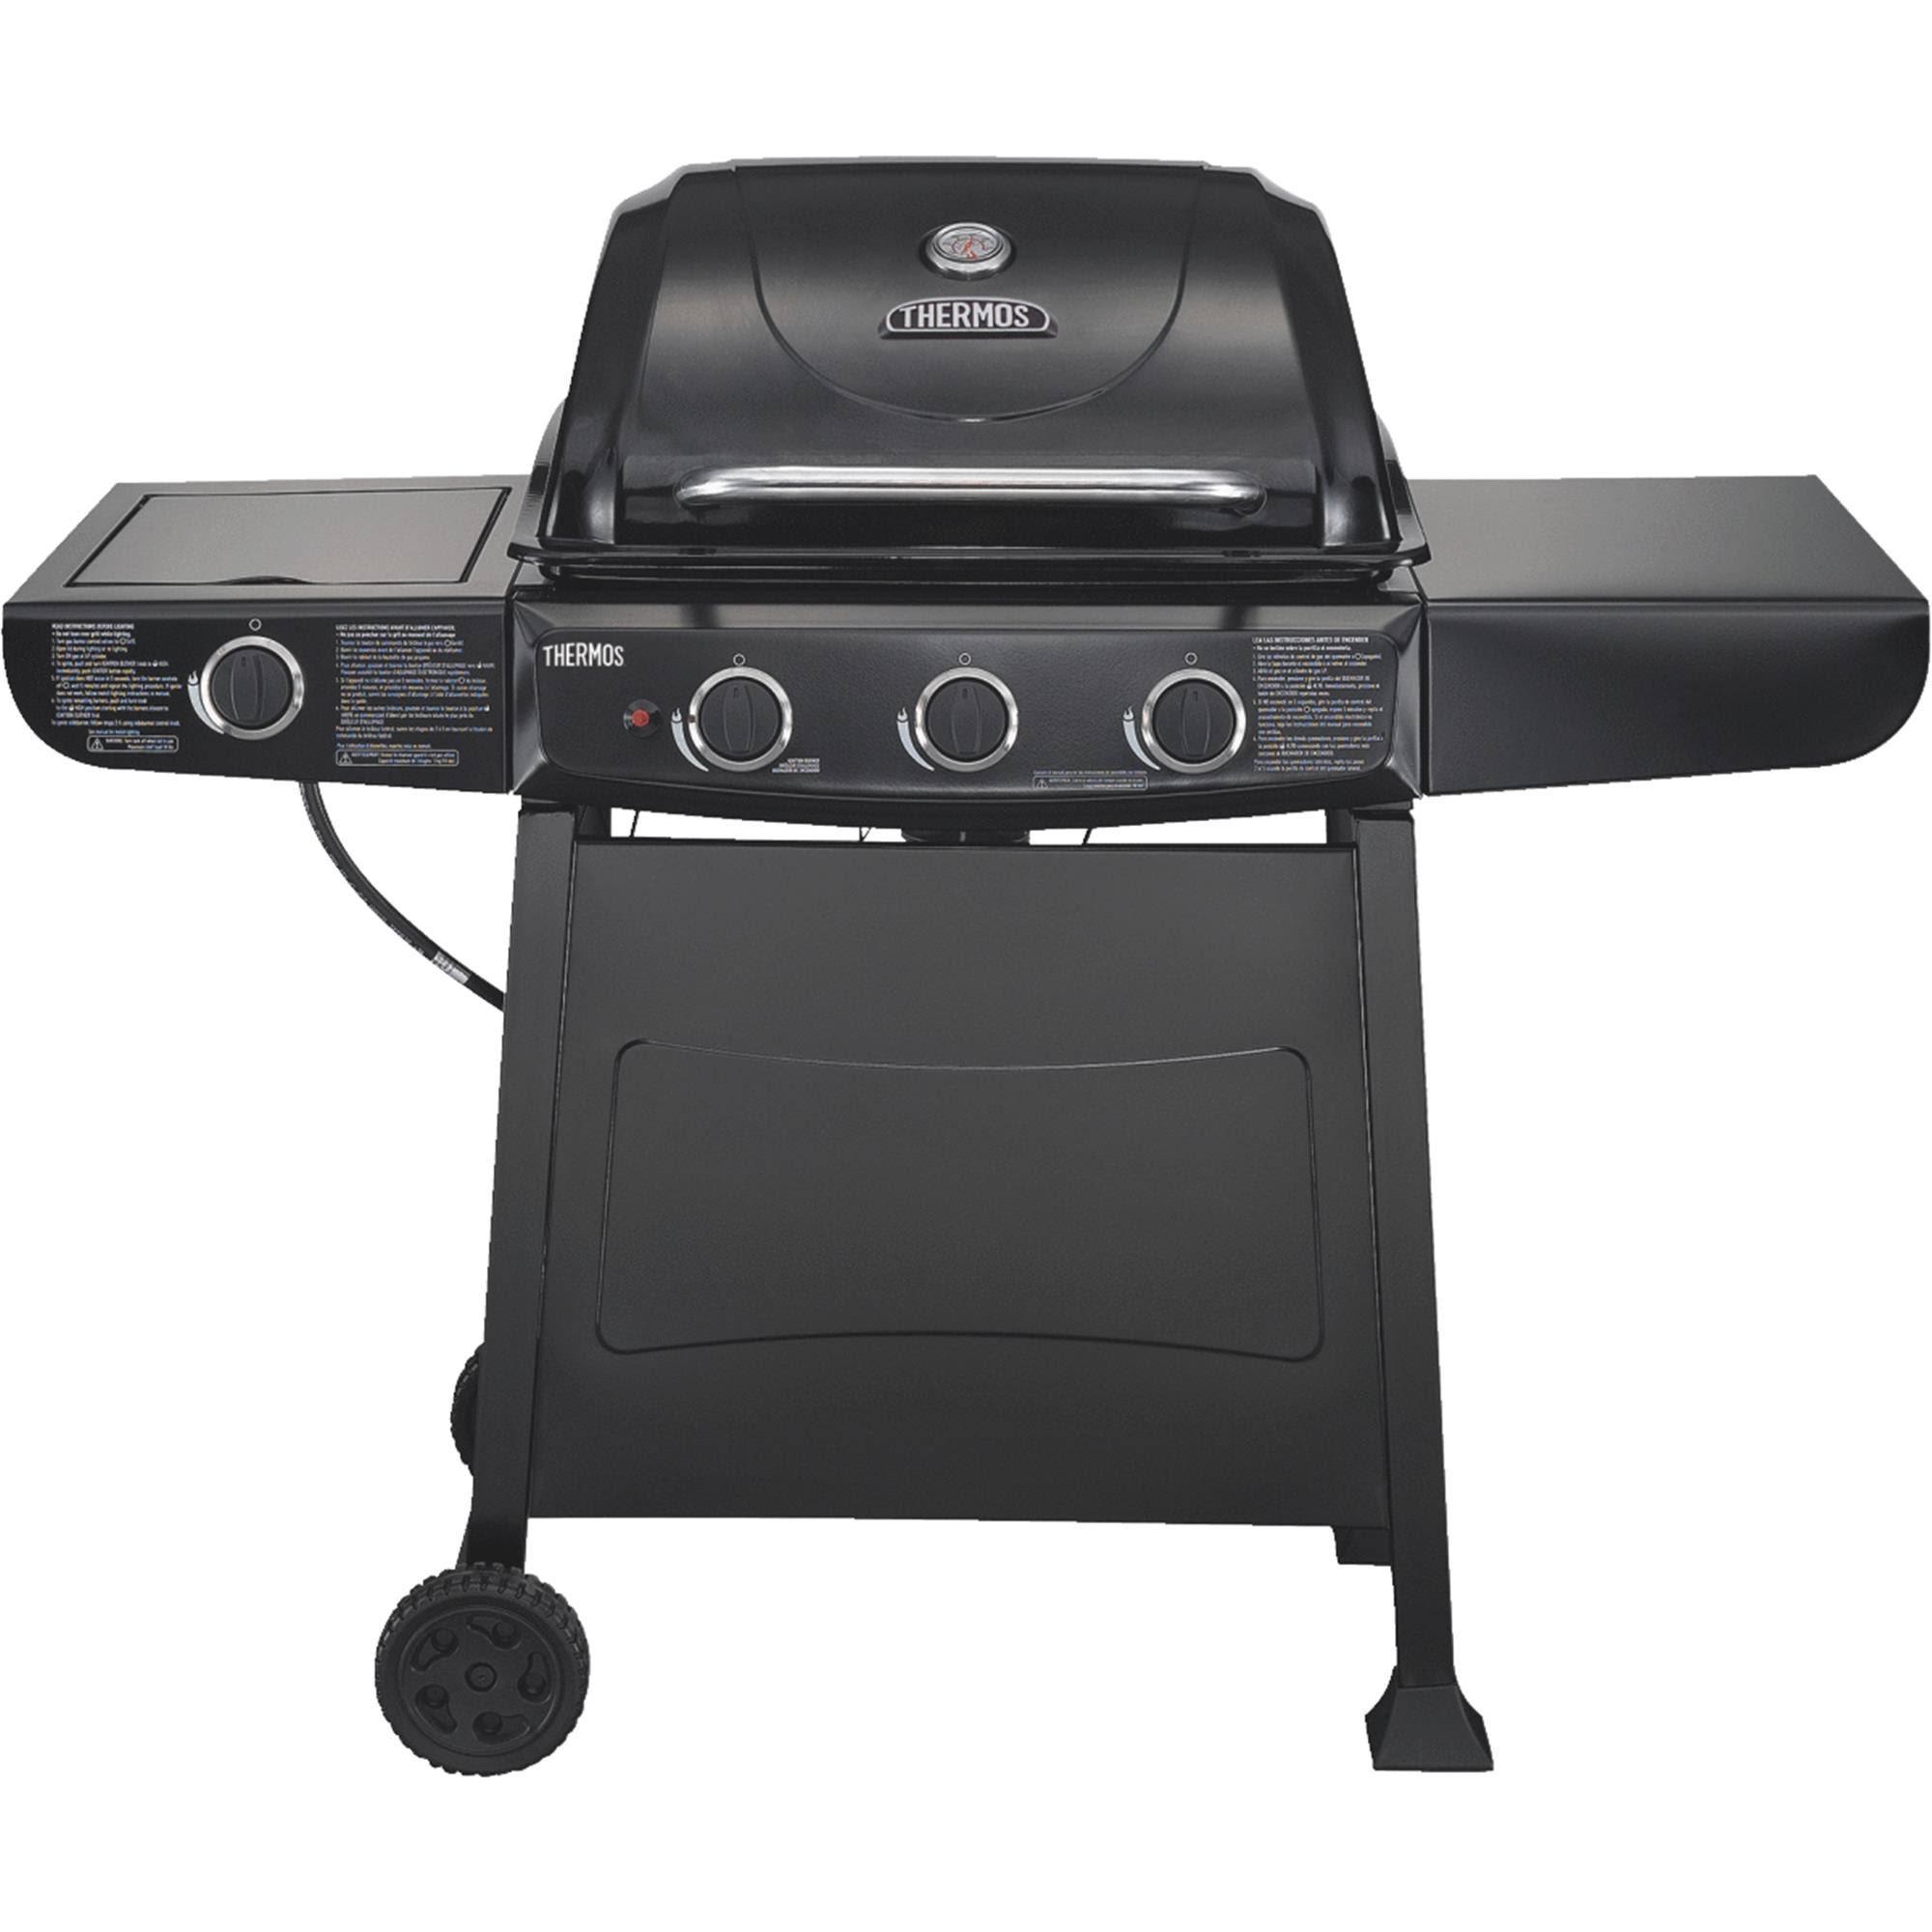 Char-Broil 461770719 Thermos Quickset 3 Burner Gas Grill